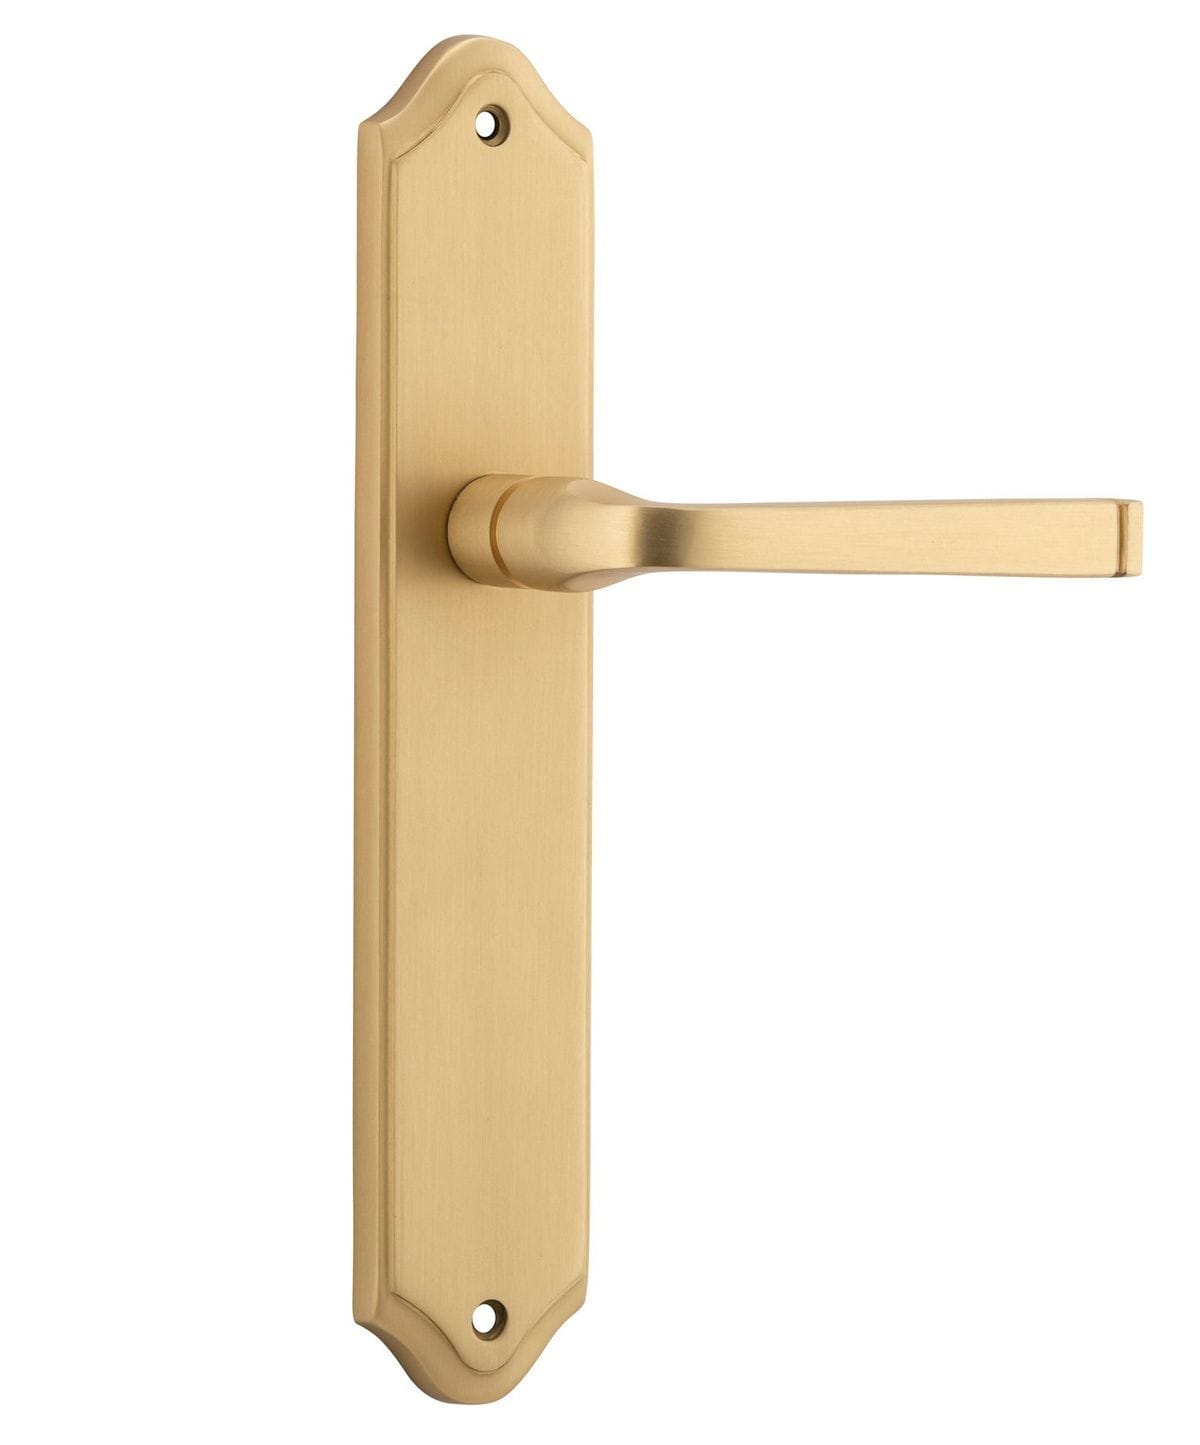 Annecy Lever Latch Shouldered Brushed Brass